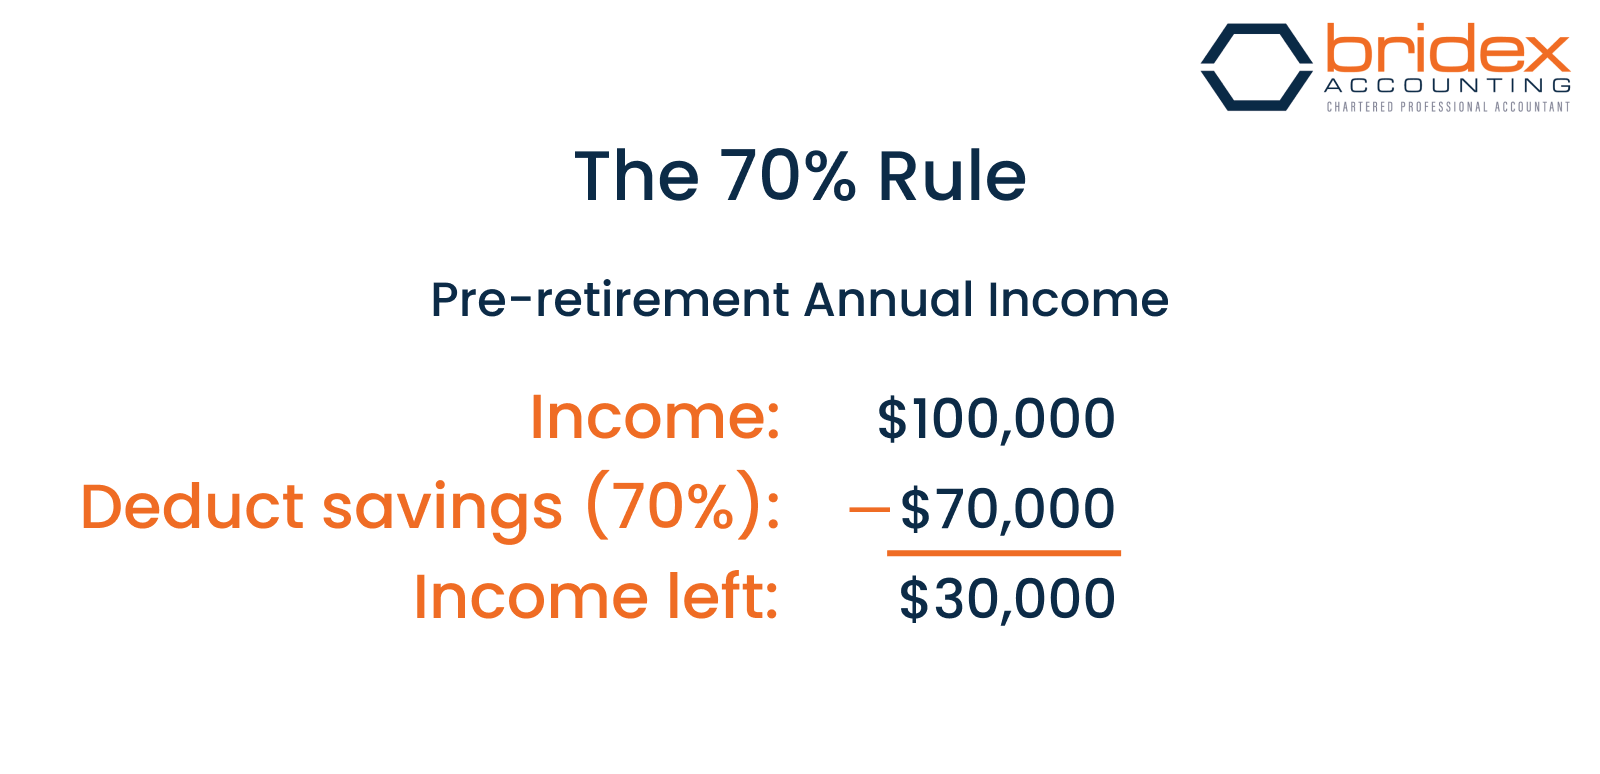 The 70% rule in investing.